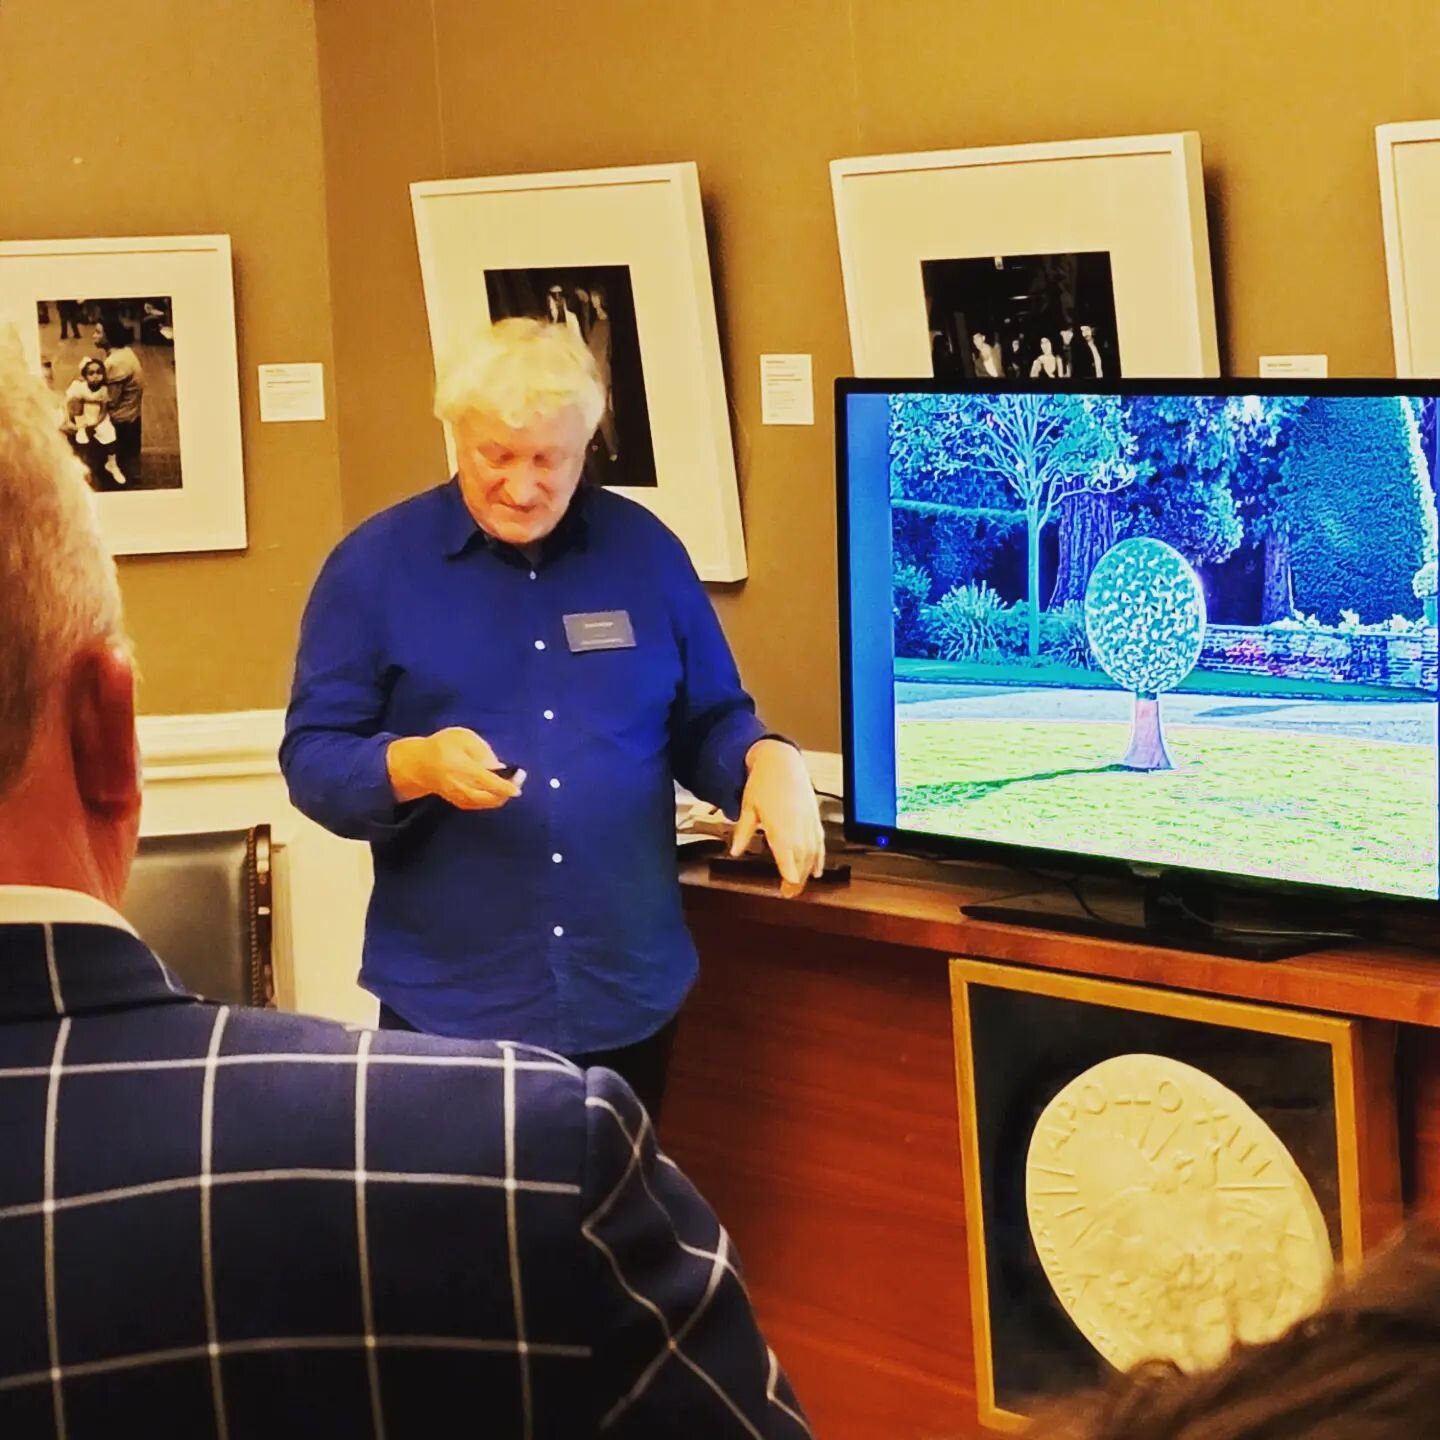 Thank you @davidharbersculptures for an amazing presentation and dinner and an introduction into your magnificent sculptures. #sculpture #sundials #artist #sculptor #chelseagardenshow #landscapedesign #ownersrepresentative #meetingnewpeople